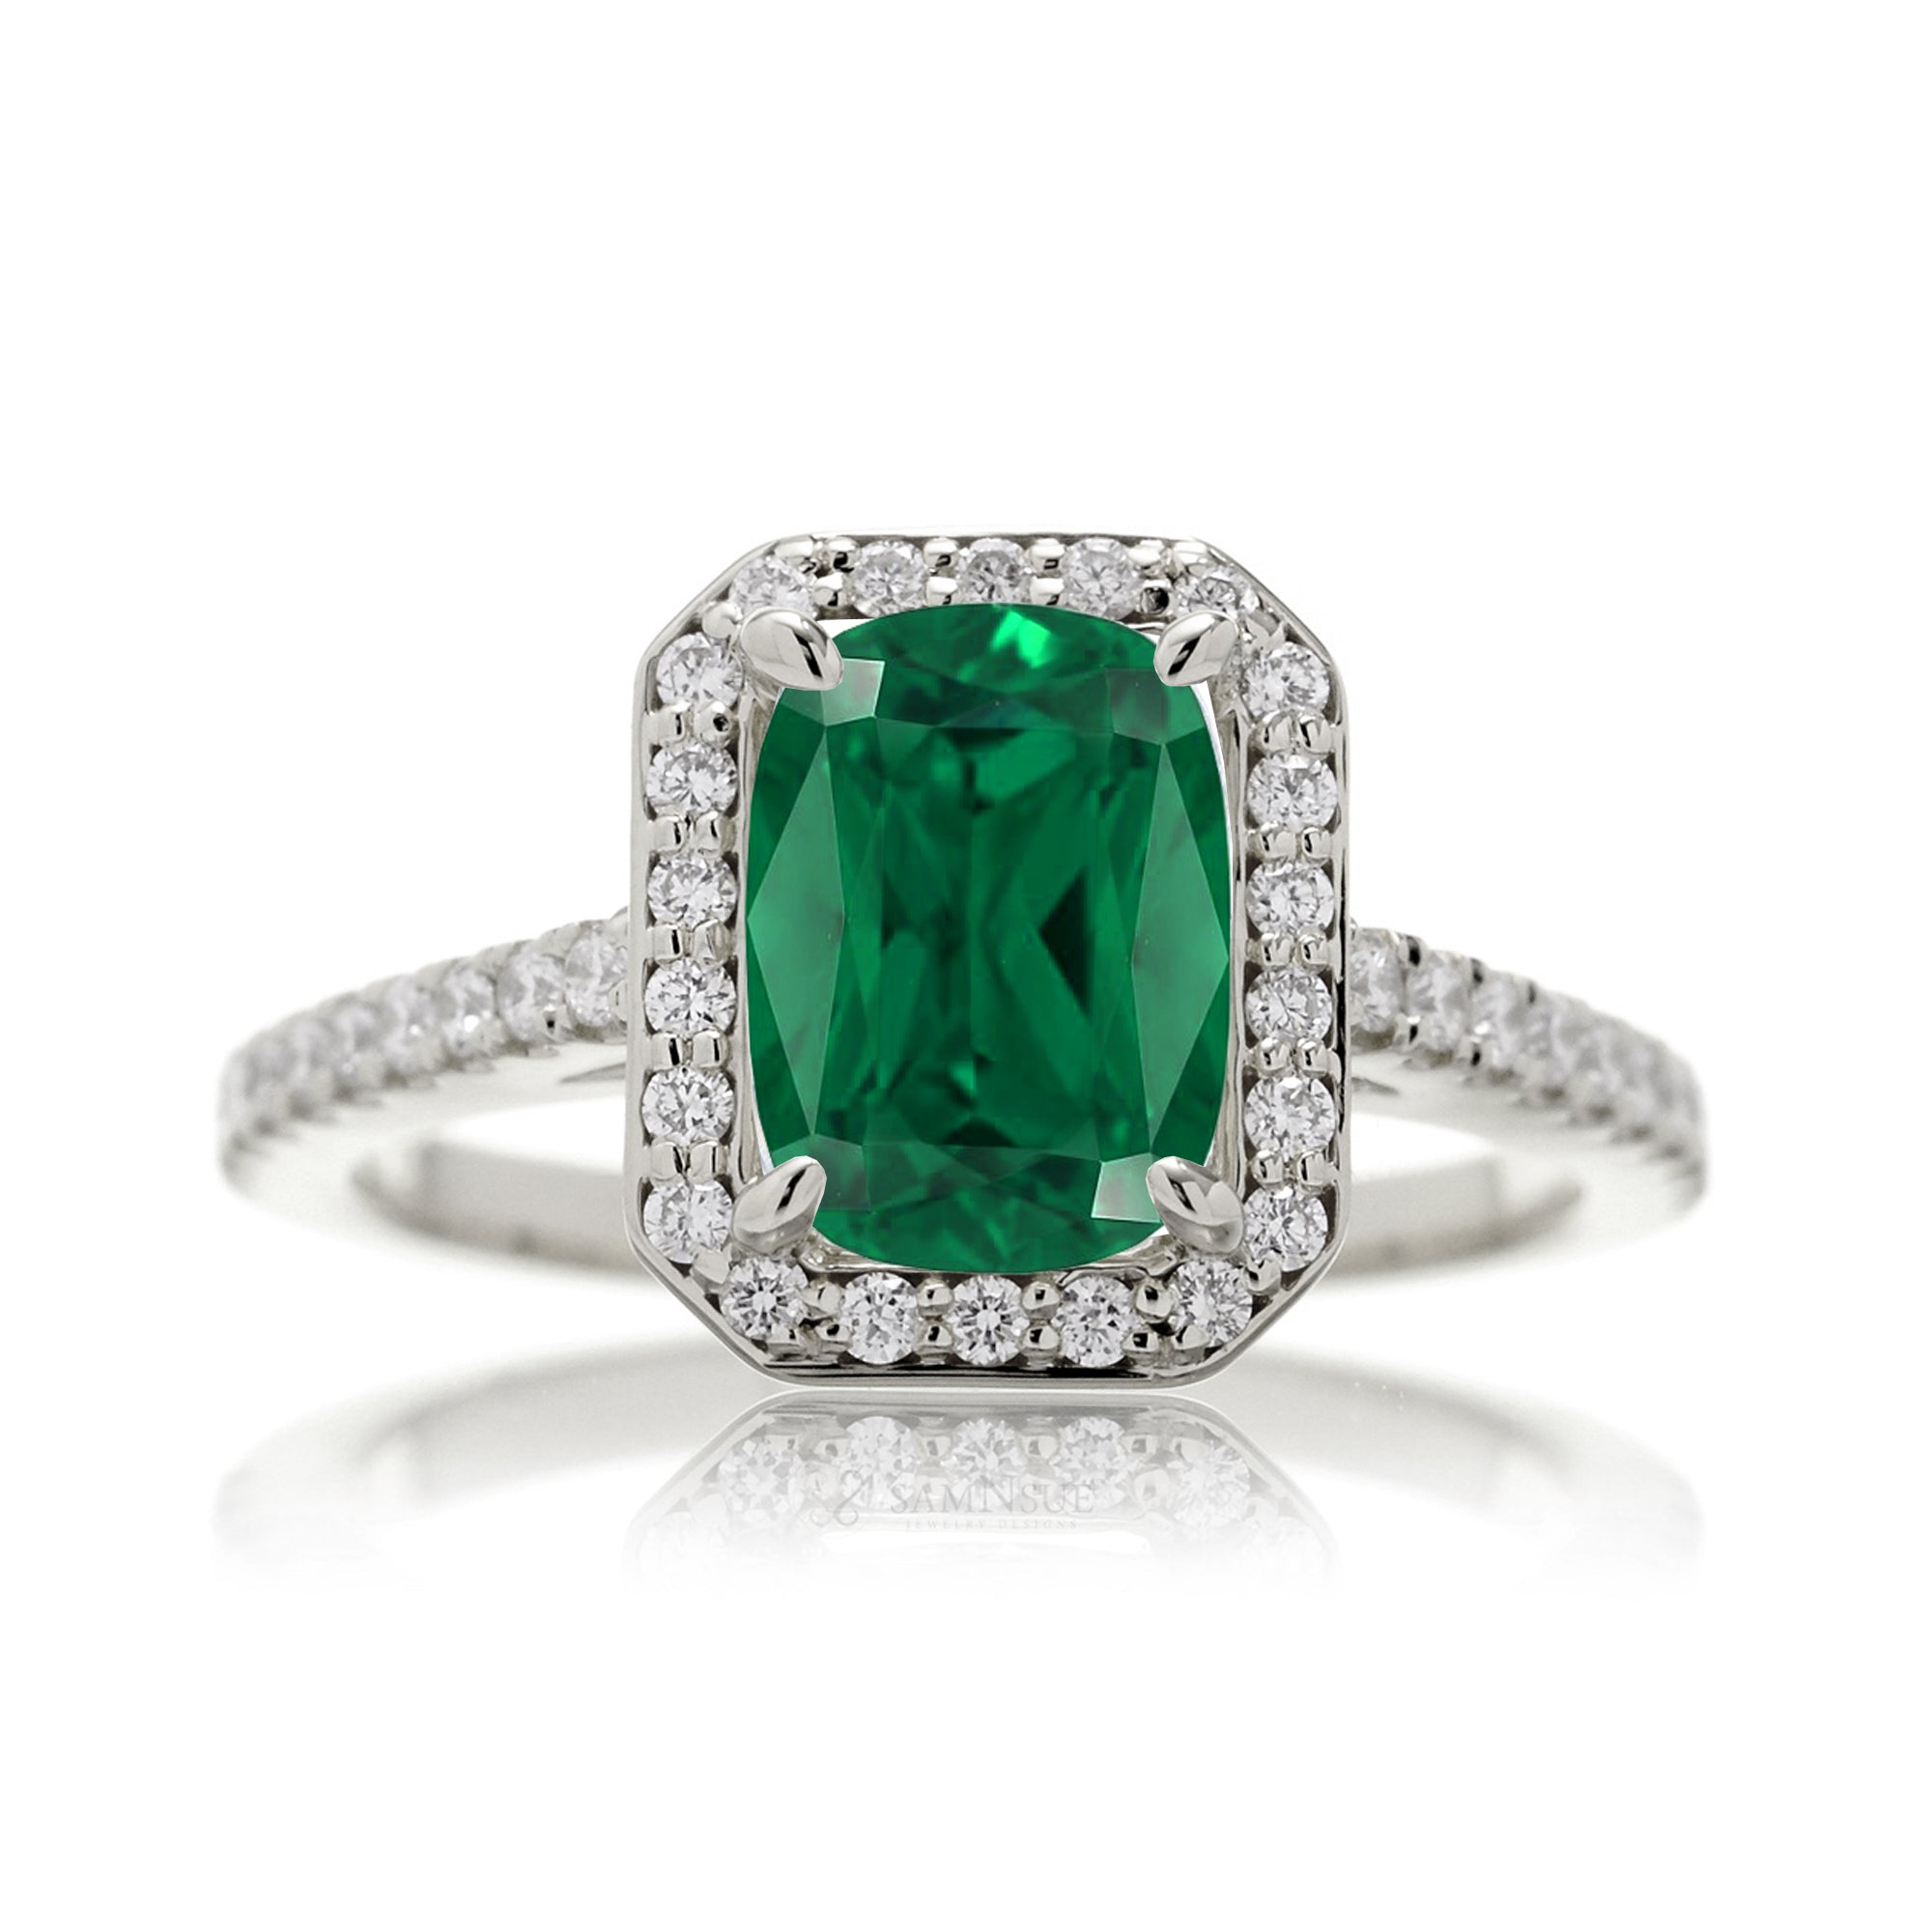 Cushion lab-grown emerald diamond halo cathedral engagement ring - the Steffy white gold